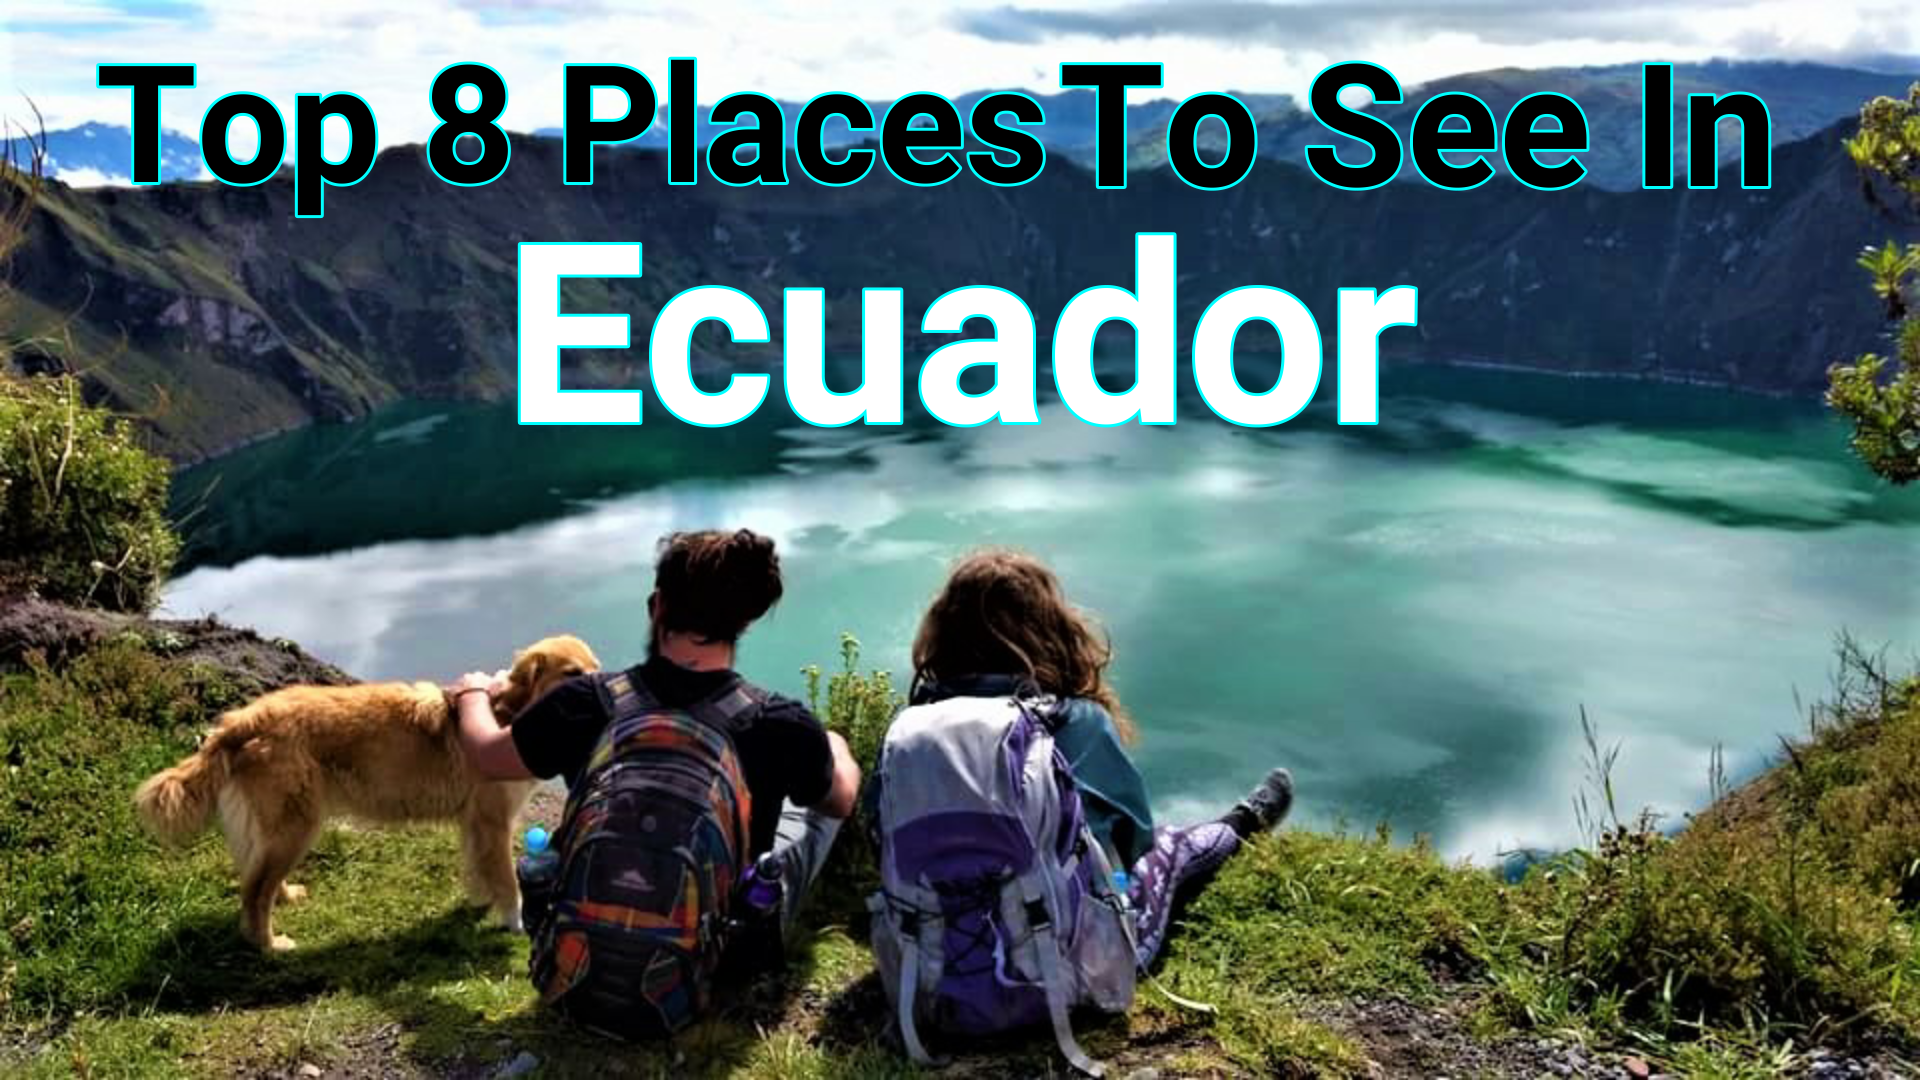 Top 8 Places to see in Ecuador